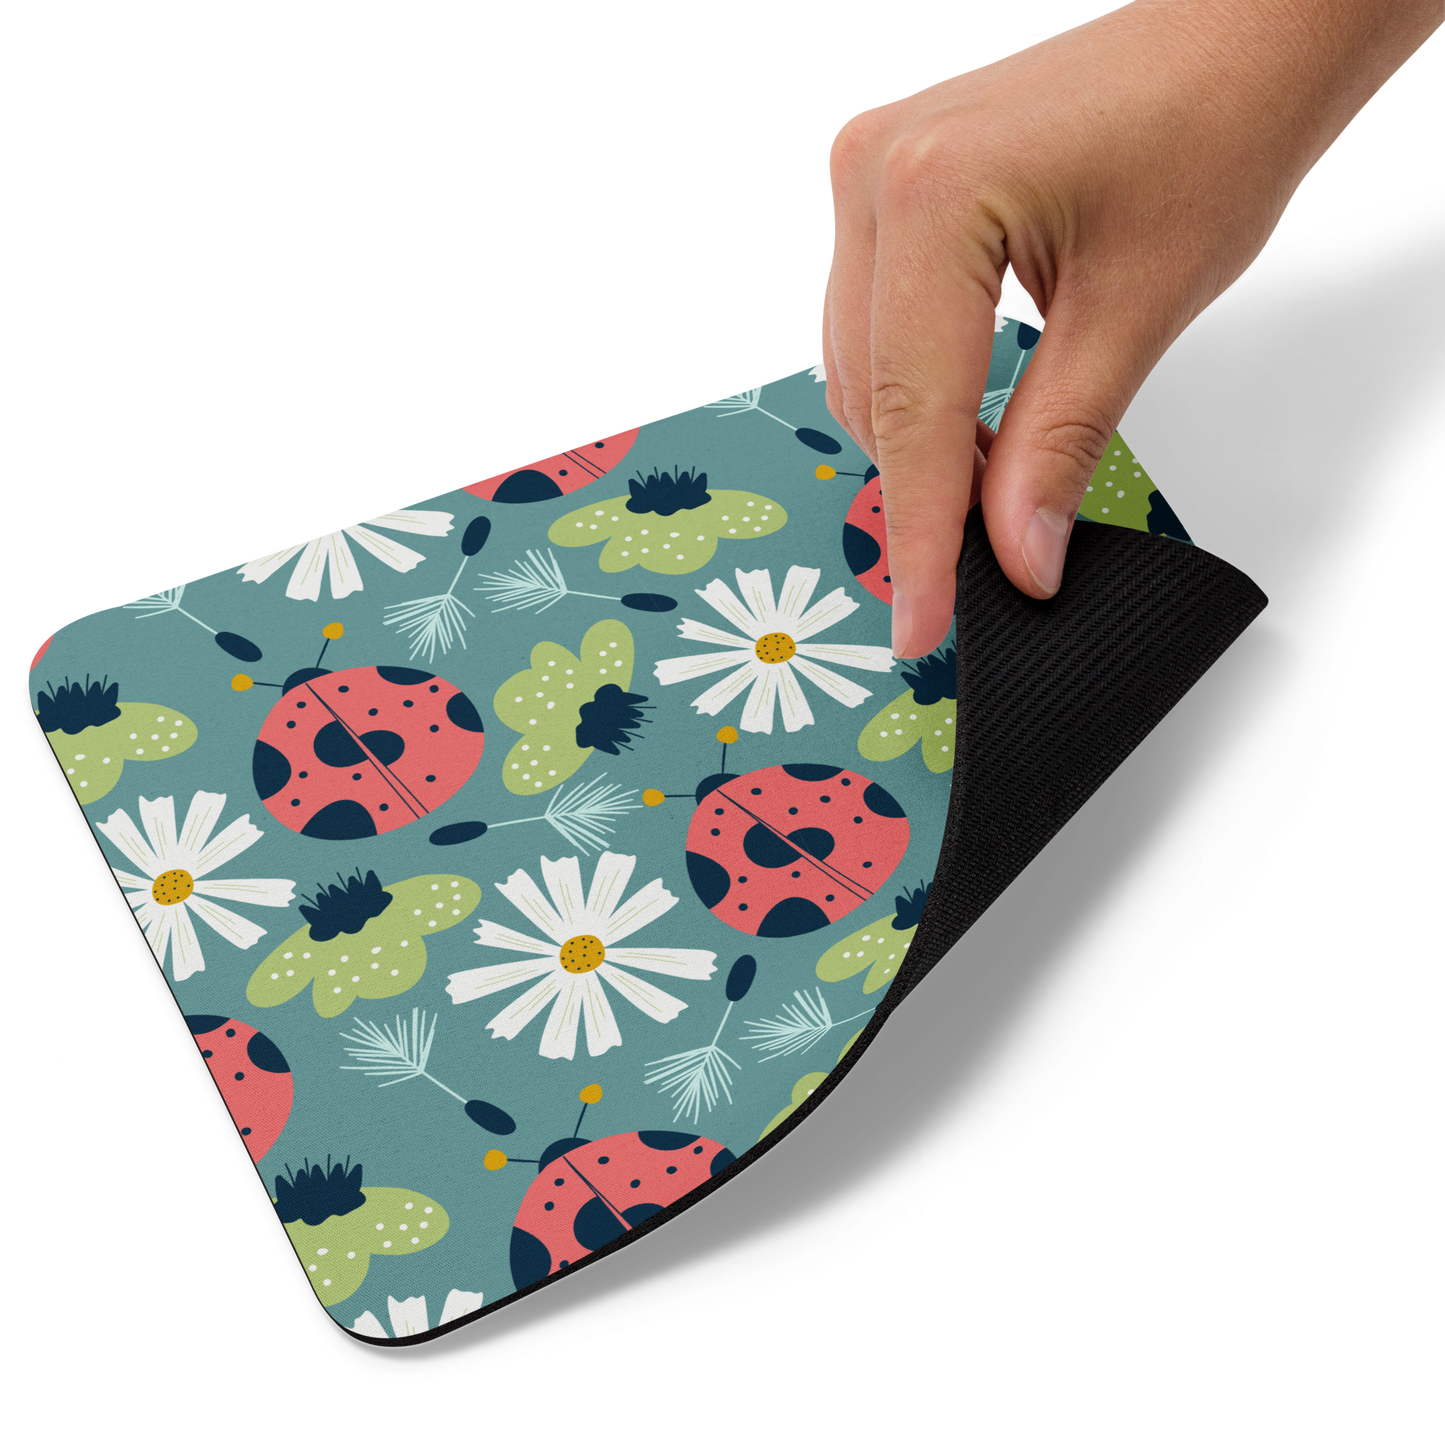 Scandinavian Spring Floral | Seamless Patterns | Mouse Pad - #2